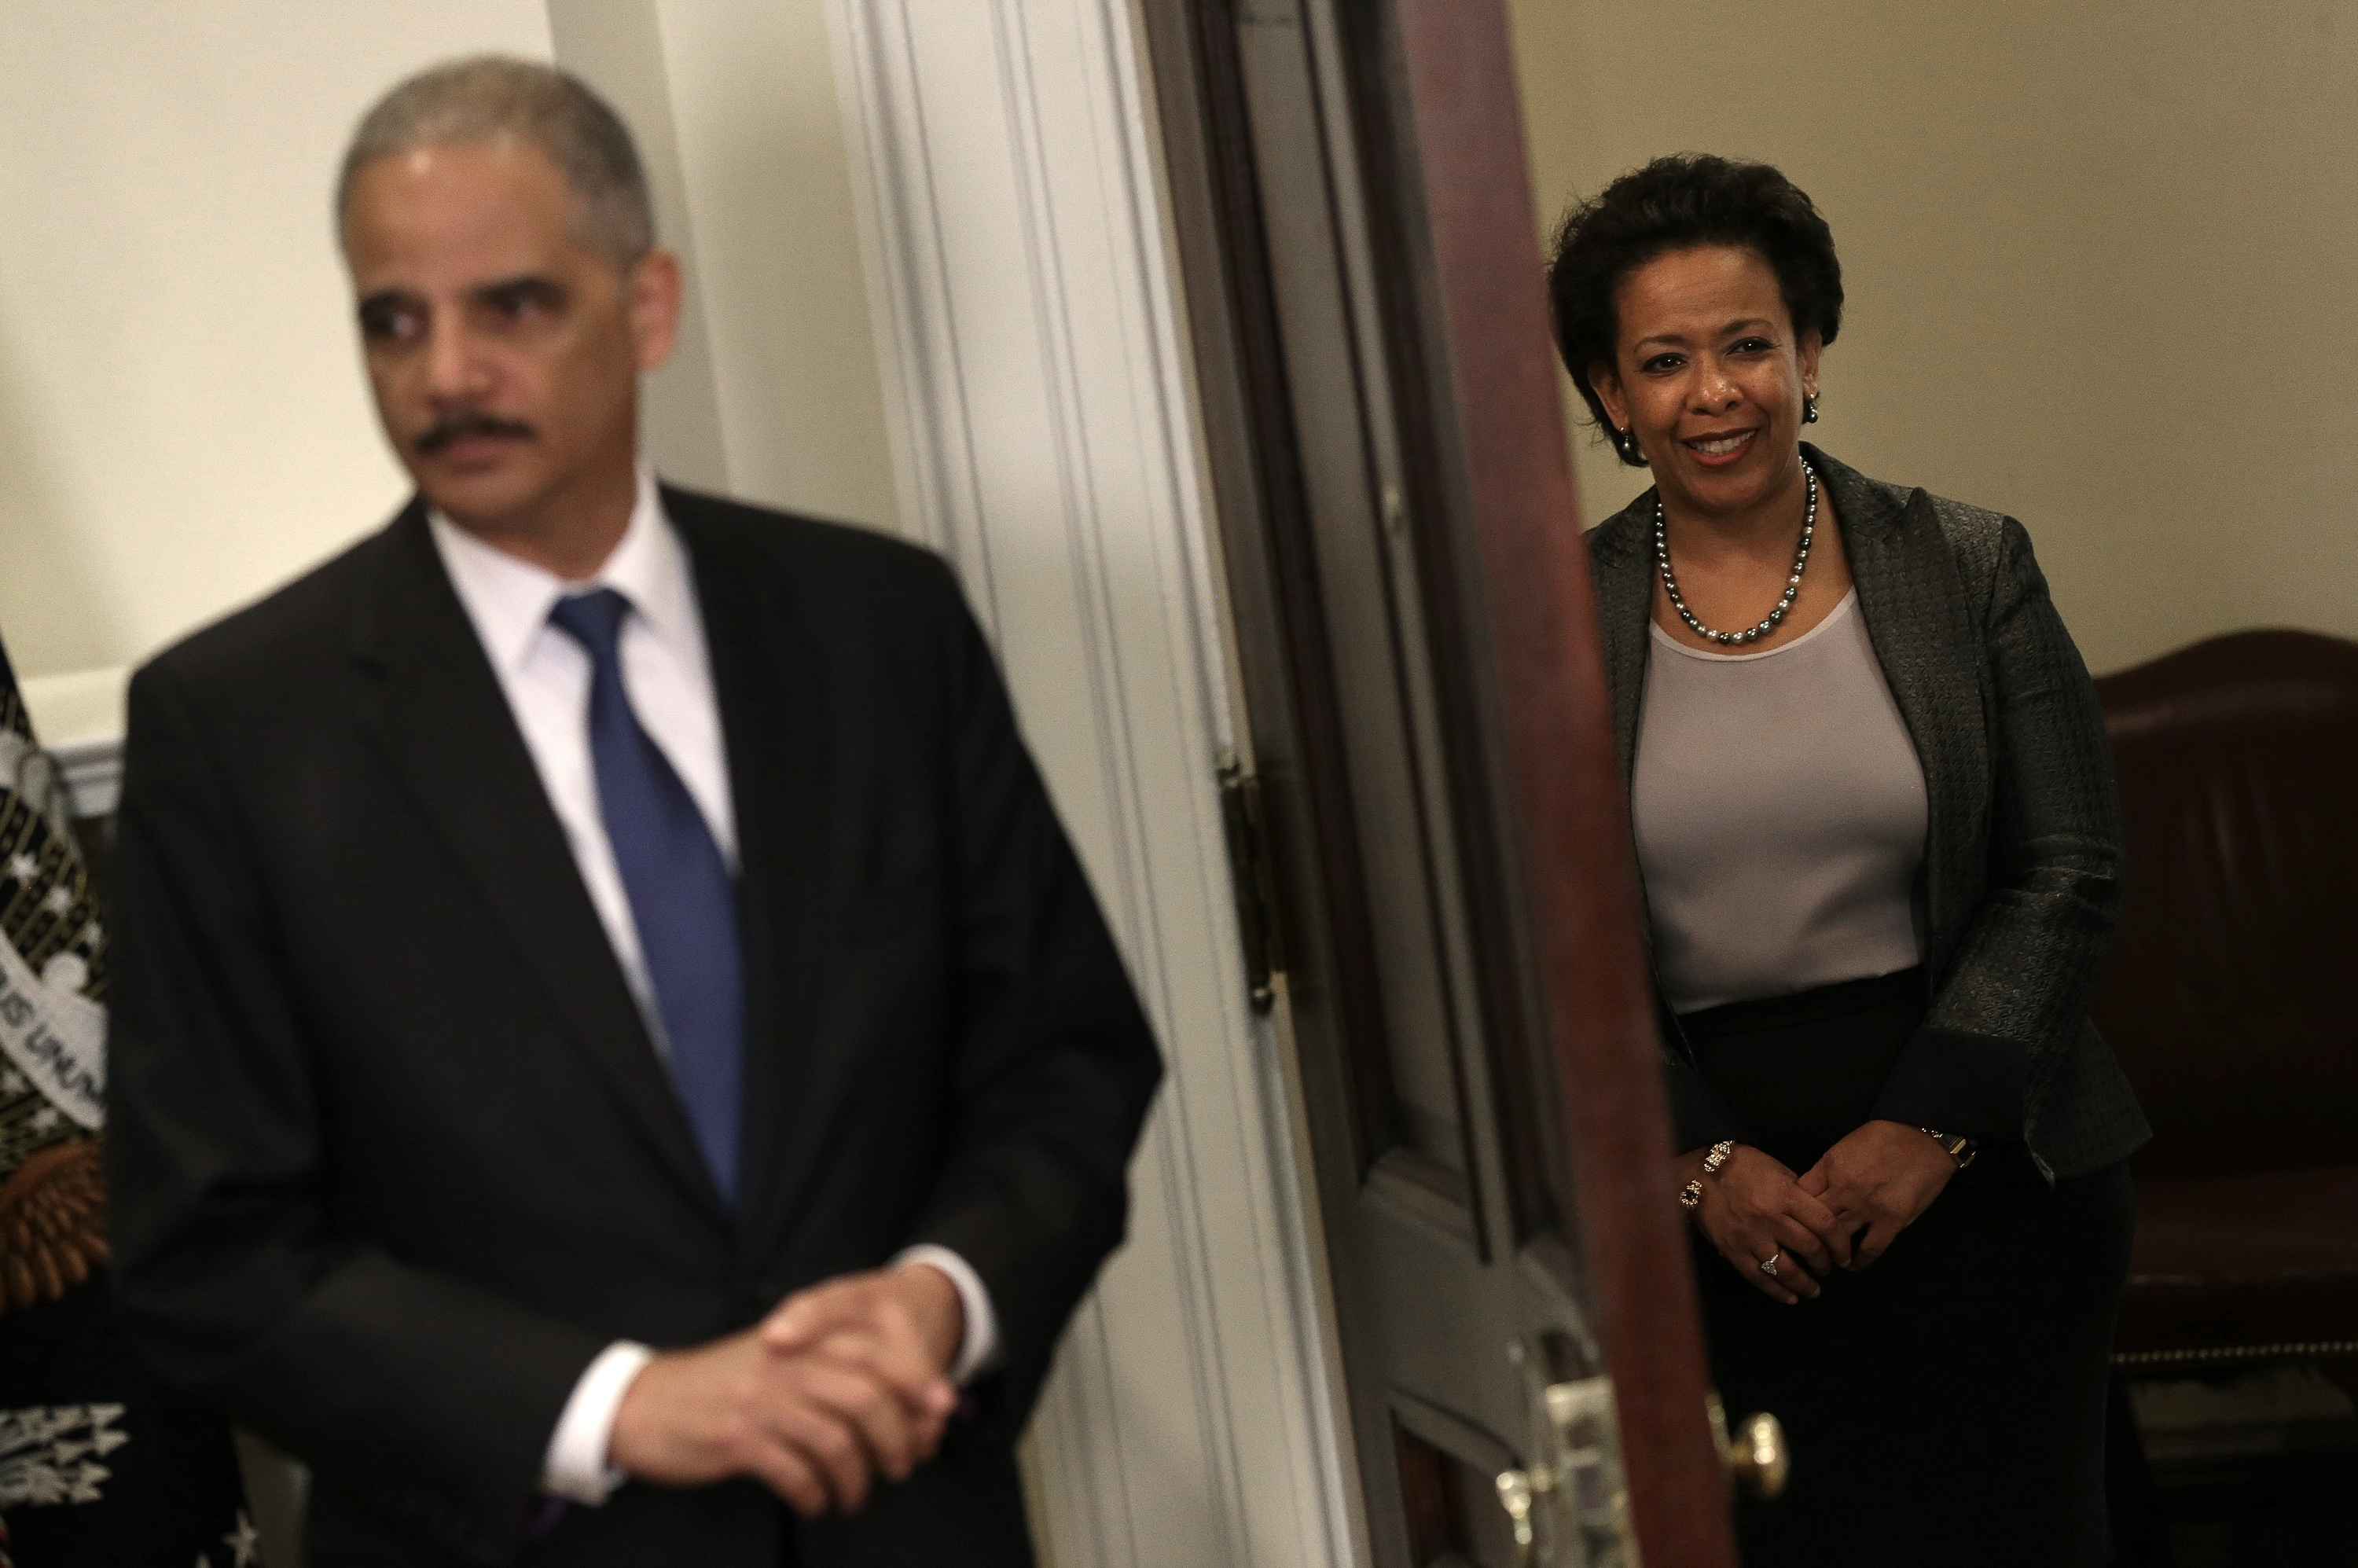 Attorney General nominee Loretta Lynch waits in the wings to replace Eric Holder following a ceremony in the Roosevelt Room of the White House, November 8, 2014. (Photo by Win McNamee/Getty Images)